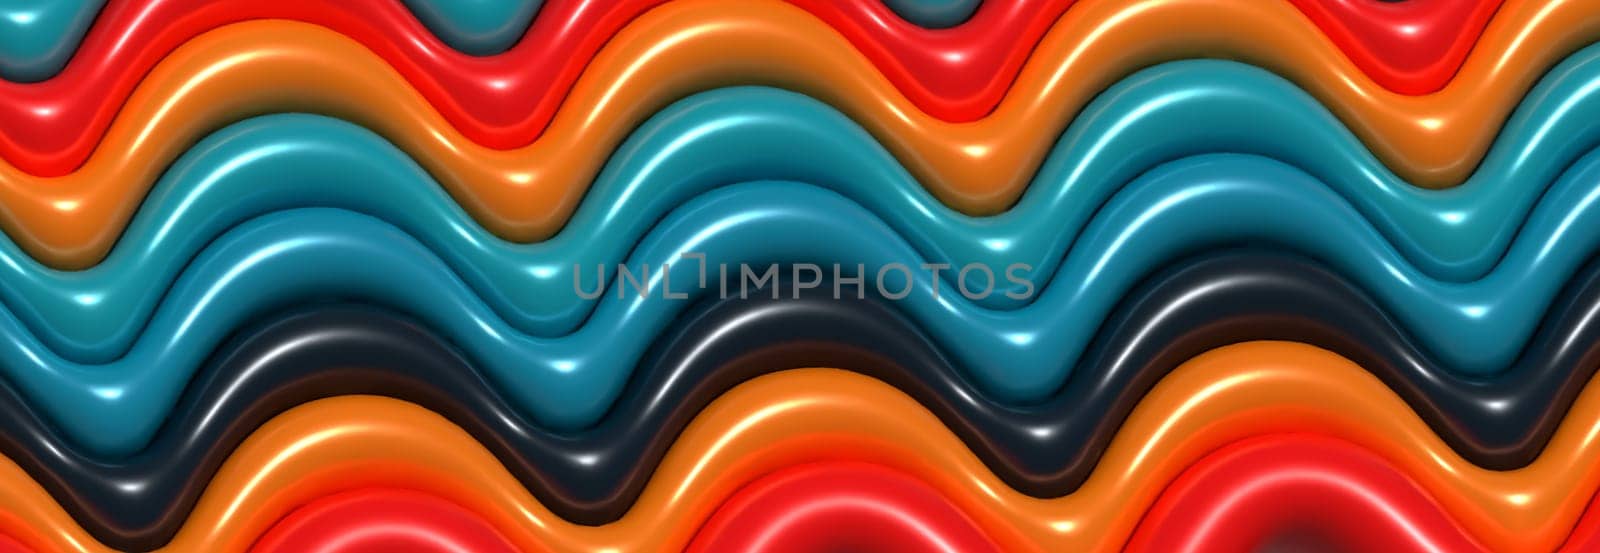 Abstract background with various inflated figures, 3D rendering illustration